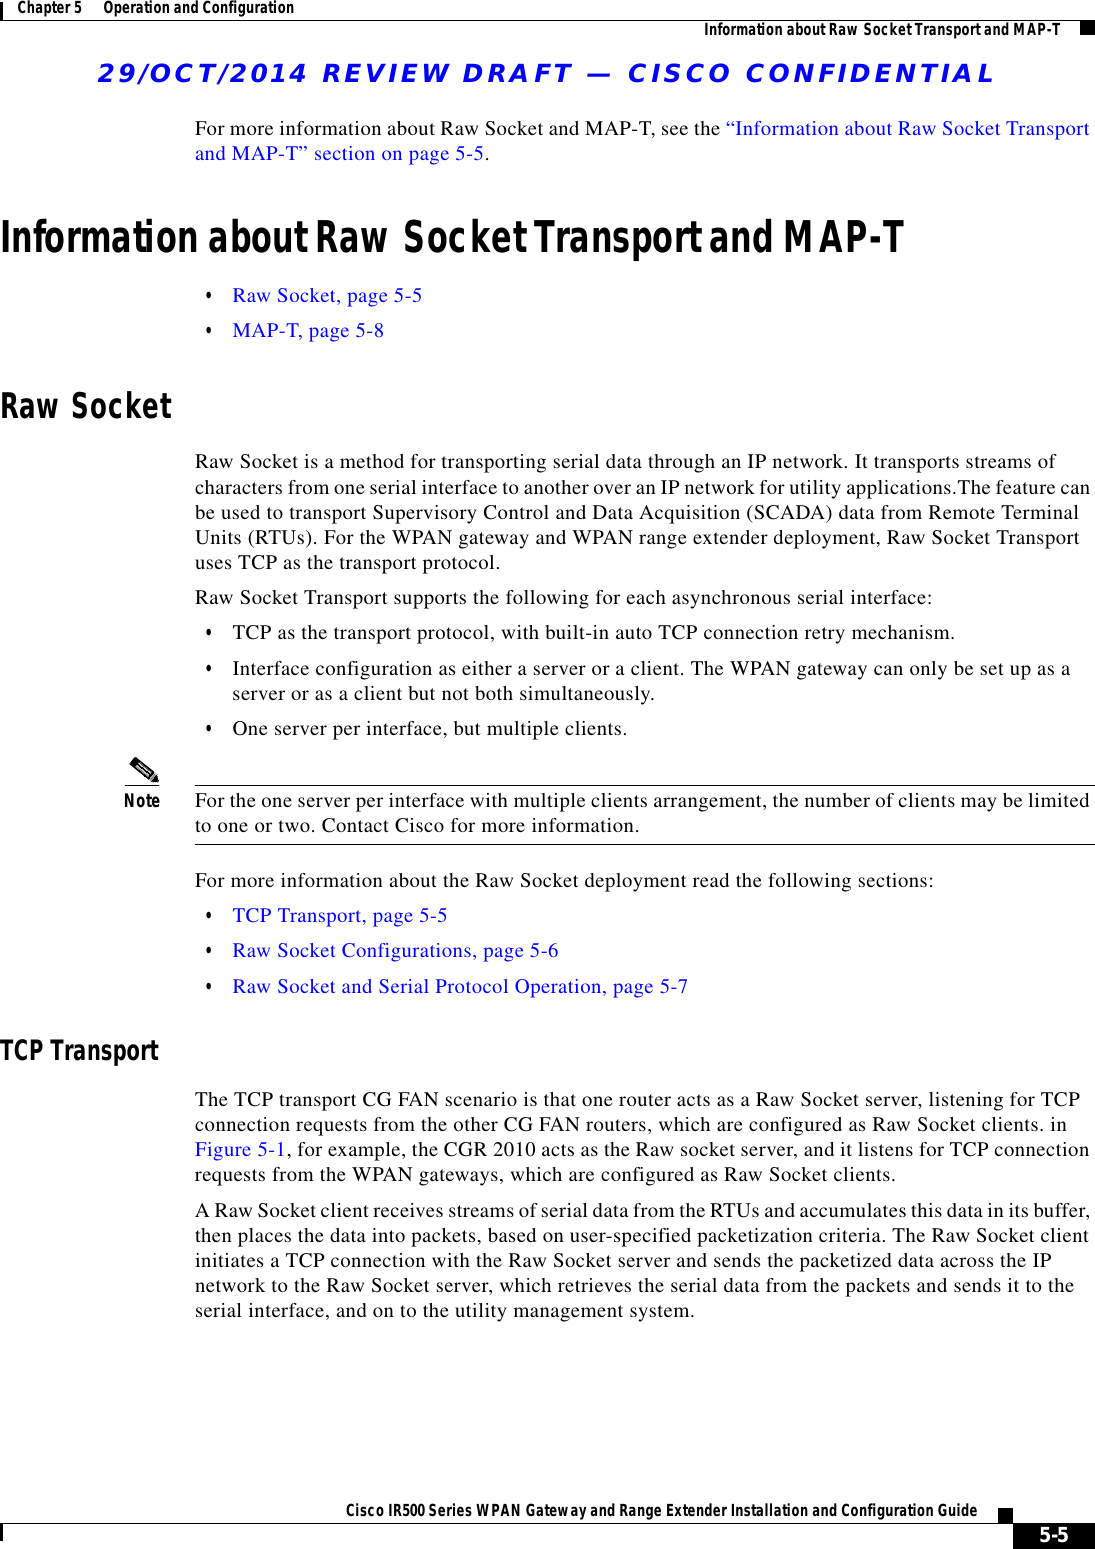 29/OCT/2014 REVIEW DRAFT — CISCO CONFIDENTIAL5-5Cisco IR500 Series WPAN Gateway and Range Extender Installation and Configuration Guide Chapter 5      Operation and Configuration Information about Raw Socket Transport and MAP-TFor more information about Raw Socket and MAP-T, see the “Information about Raw Socket Transport and MAP-T” section on page 5-5.Information about Raw Socket Transport and MAP-T  • Raw Socket, page 5-5  • MAP-T, page 5-8Raw SocketRaw Socket is a method for transporting serial data through an IP network. It transports streams of characters from one serial interface to another over an IP network for utility applications.The feature can be used to transport Supervisory Control and Data Acquisition (SCADA) data from Remote Terminal Units (RTUs). For the WPAN gateway and WPAN range extender deployment, Raw Socket Transport uses TCP as the transport protocol.Raw Socket Transport supports the following for each asynchronous serial interface:  • TCP as the transport protocol, with built-in auto TCP connection retry mechanism.  • Interface configuration as either a server or a client. The WPAN gateway can only be set up as a server or as a client but not both simultaneously.  • One server per interface, but multiple clients.Note For the one server per interface with multiple clients arrangement, the number of clients may be limited to one or two. Contact Cisco for more information.For more information about the Raw Socket deployment read the following sections:  • TCP Transport, page 5-5  • Raw Socket Configurations, page 5-6  • Raw Socket and Serial Protocol Operation, page 5-7TCP TransportThe TCP transport CG FAN scenario is that one router acts as a Raw Socket server, listening for TCP connection requests from the other CG FAN routers, which are configured as Raw Socket clients. in Figure 5-1, for example, the CGR 2010 acts as the Raw socket server, and it listens for TCP connection requests from the WPAN gateways, which are configured as Raw Socket clients.A Raw Socket client receives streams of serial data from the RTUs and accumulates this data in its buffer, then places the data into packets, based on user-specified packetization criteria. The Raw Socket client initiates a TCP connection with the Raw Socket server and sends the packetized data across the IP network to the Raw Socket server, which retrieves the serial data from the packets and sends it to the serial interface, and on to the utility management system.